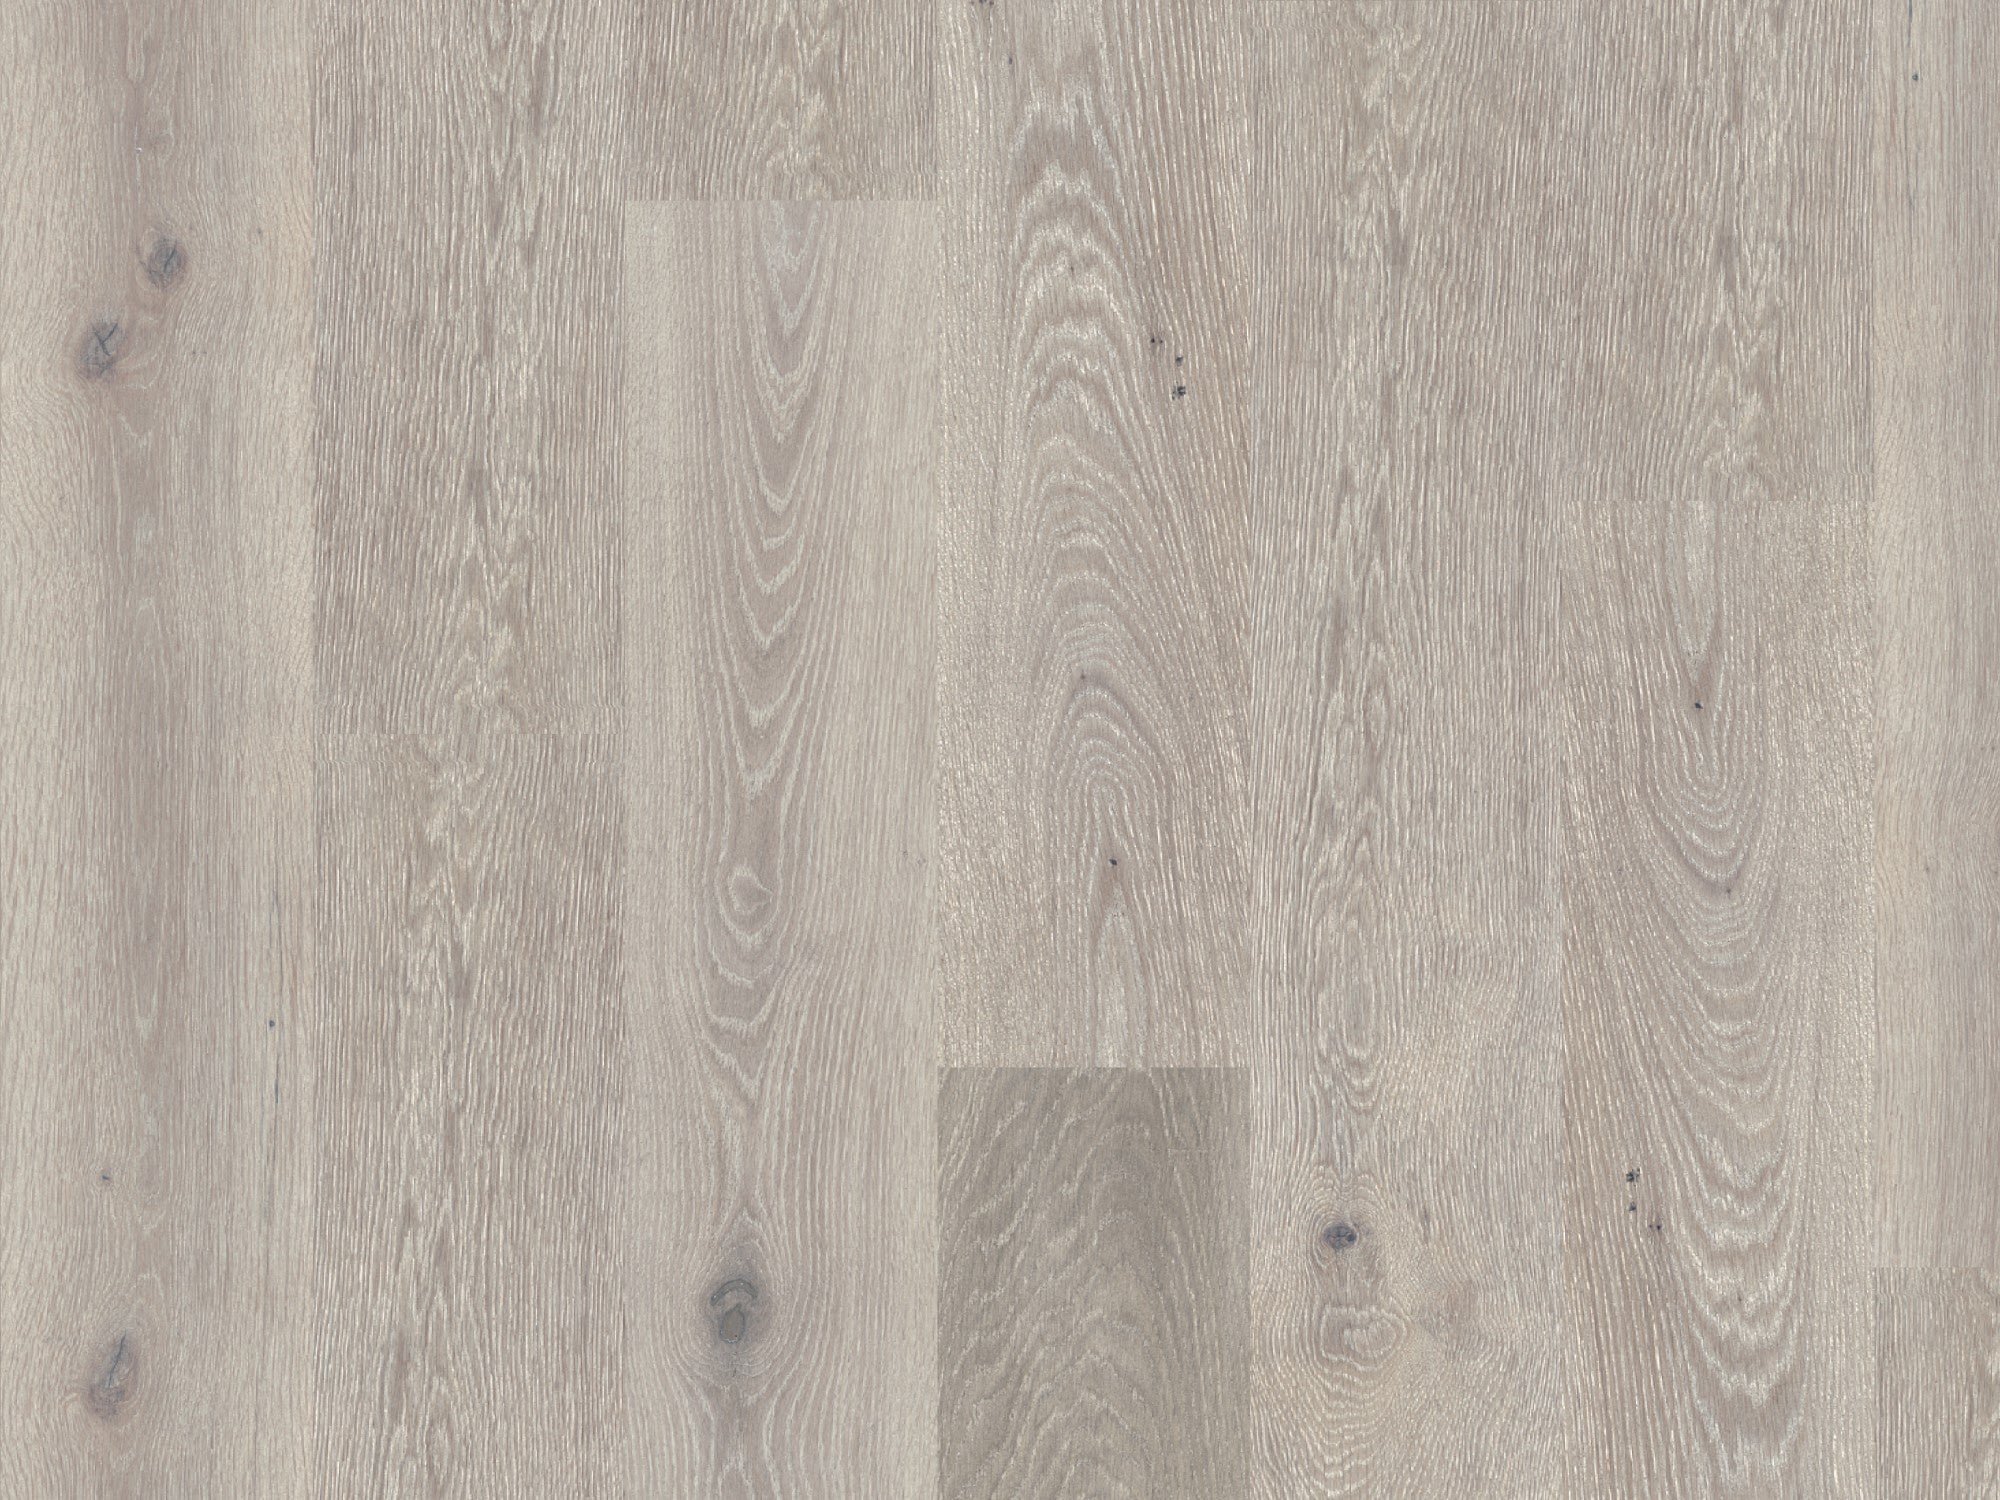 duchateau signature global winds harmattan european oak engineered hardnatural wood floor uv lacquer finish for interior use distributed by surface group international